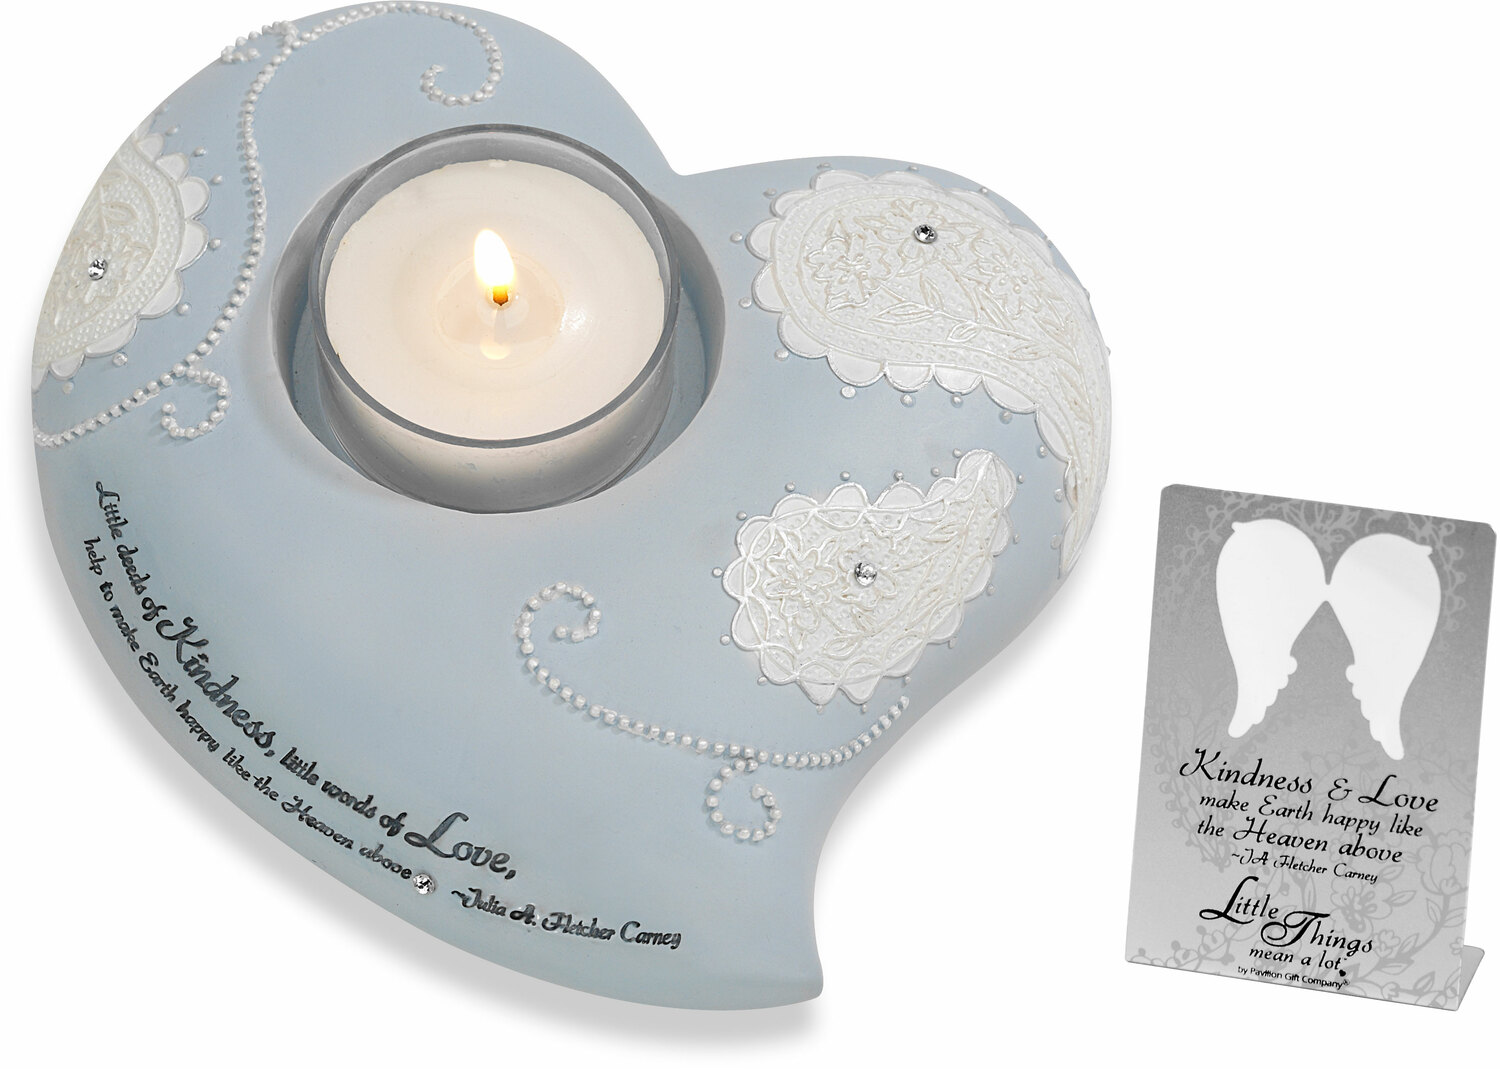 Kindness and Love by Little Things Mean A Lot - Kindness and Love - 4.75" Heart Tealight Holder